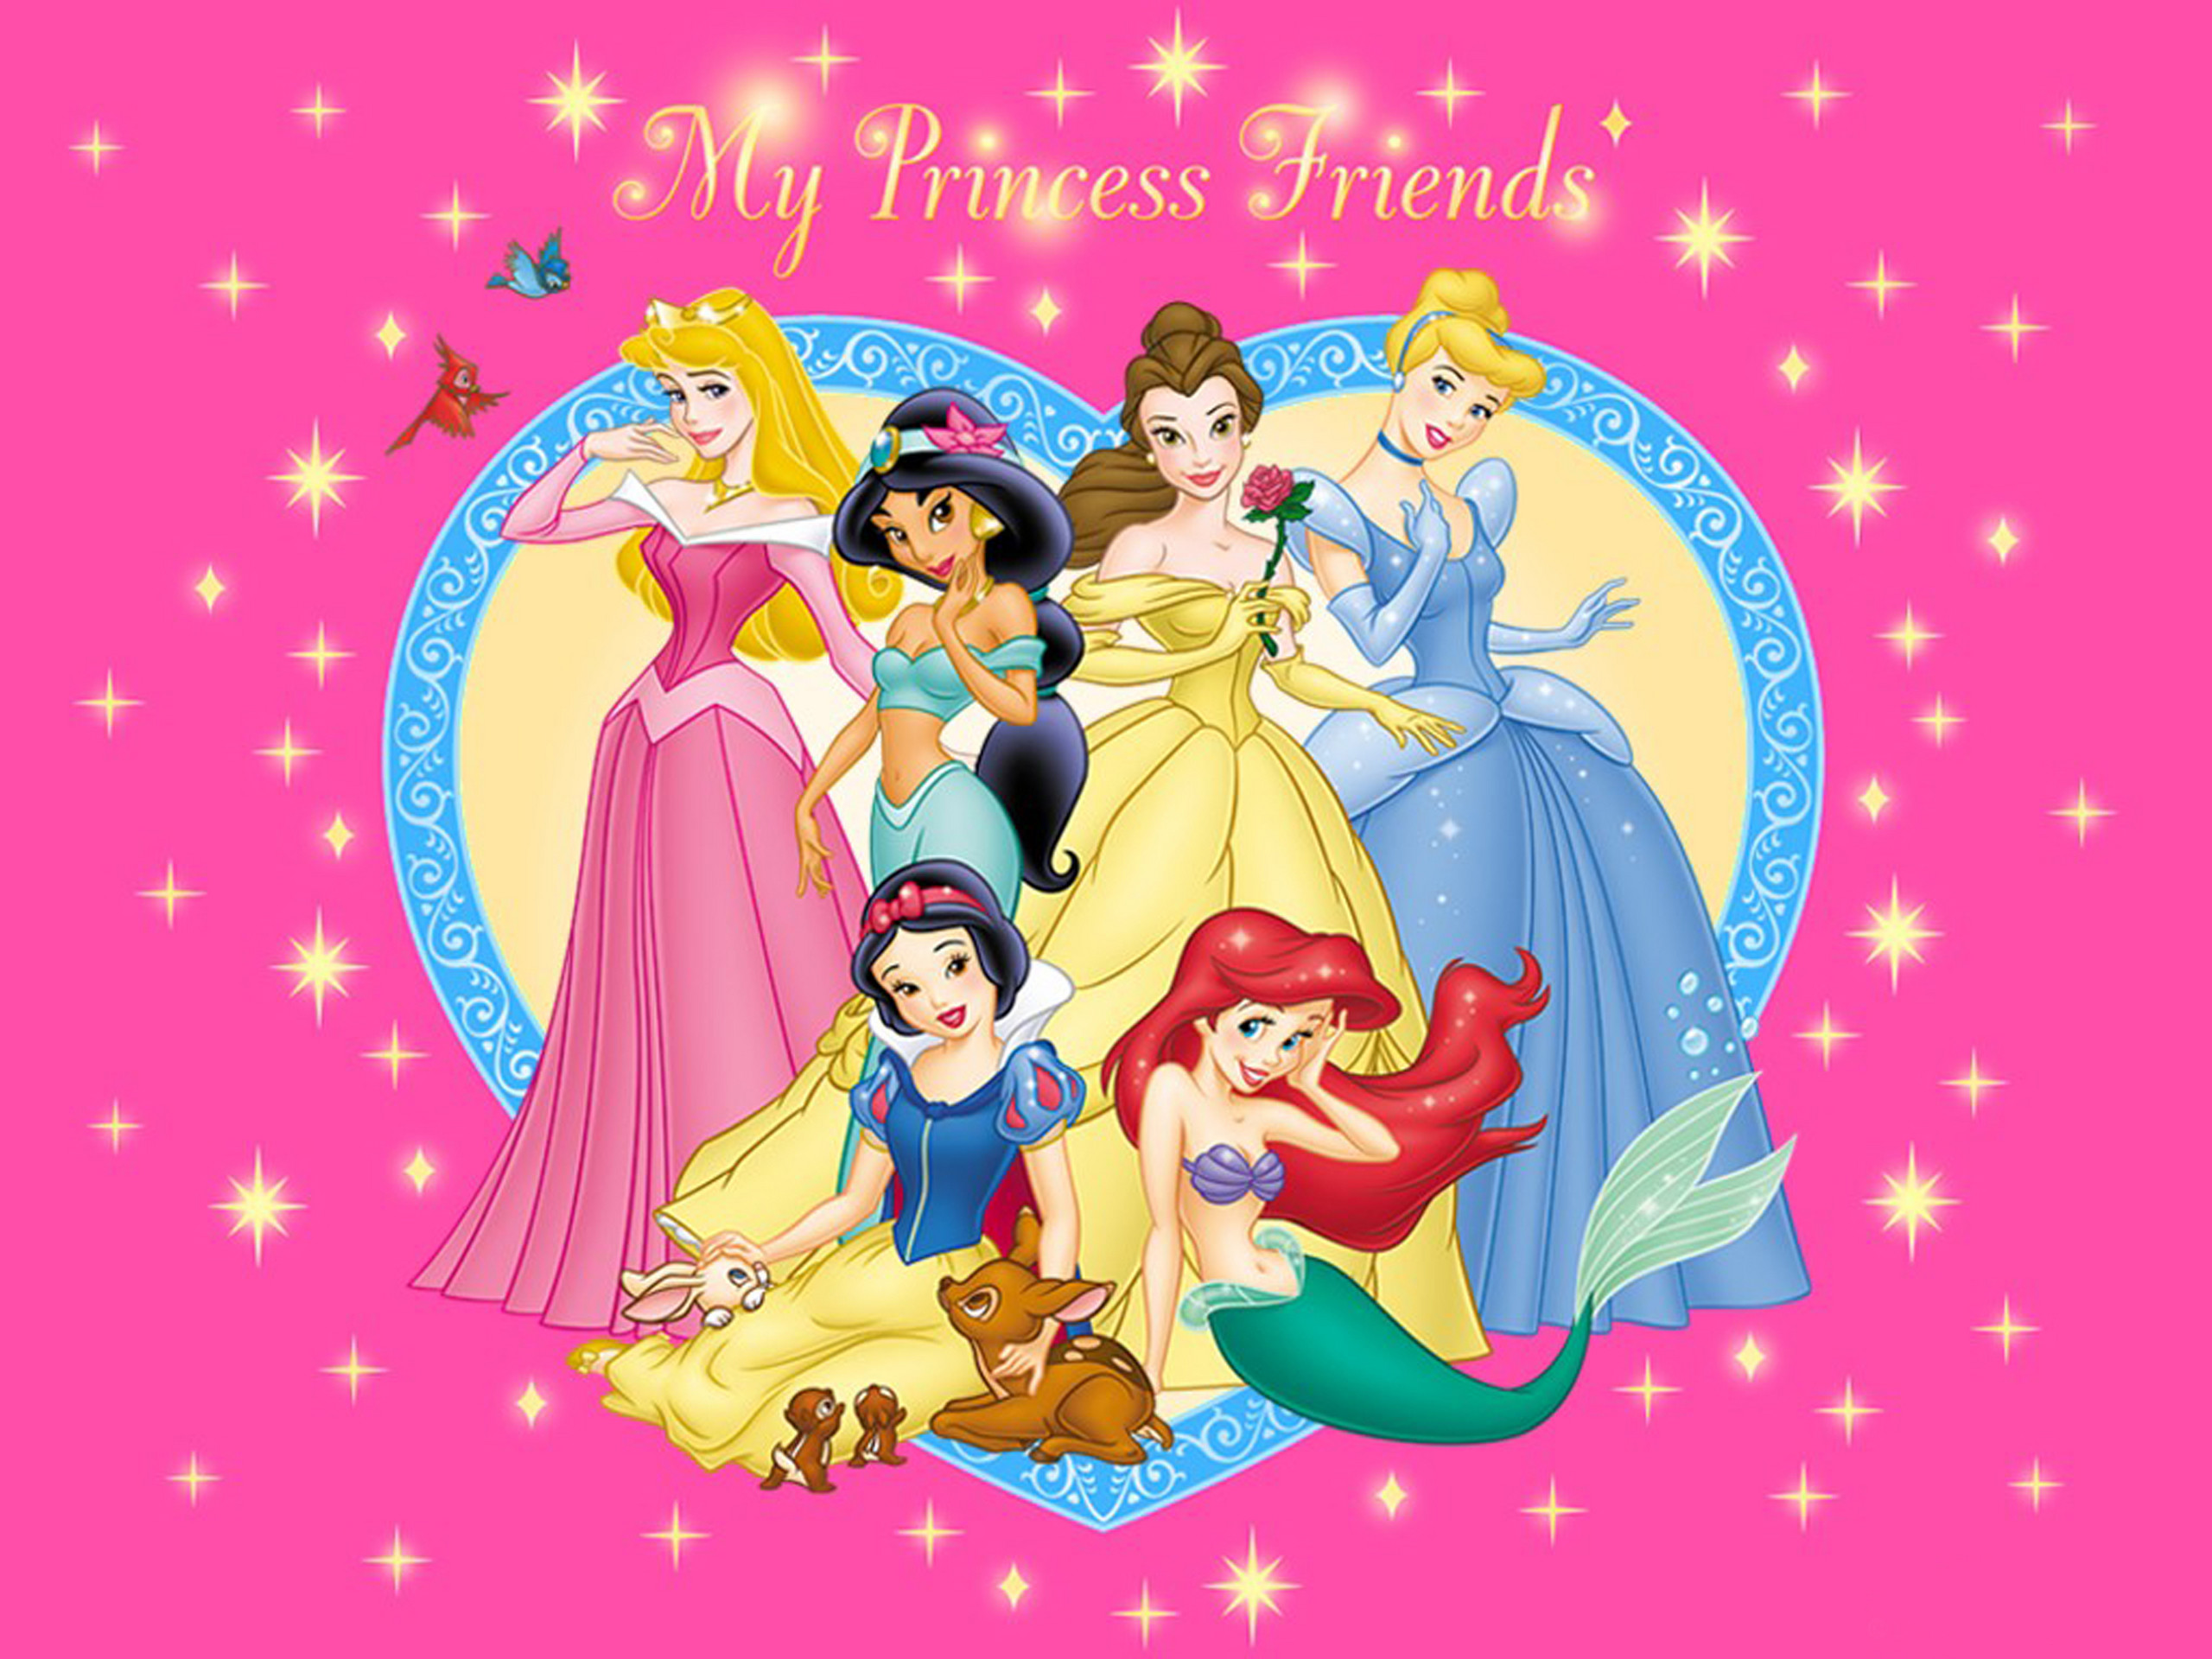 2560x1920 Disney Princess Party Ideas, this might come in handy since Colbie is  princess obsessed!